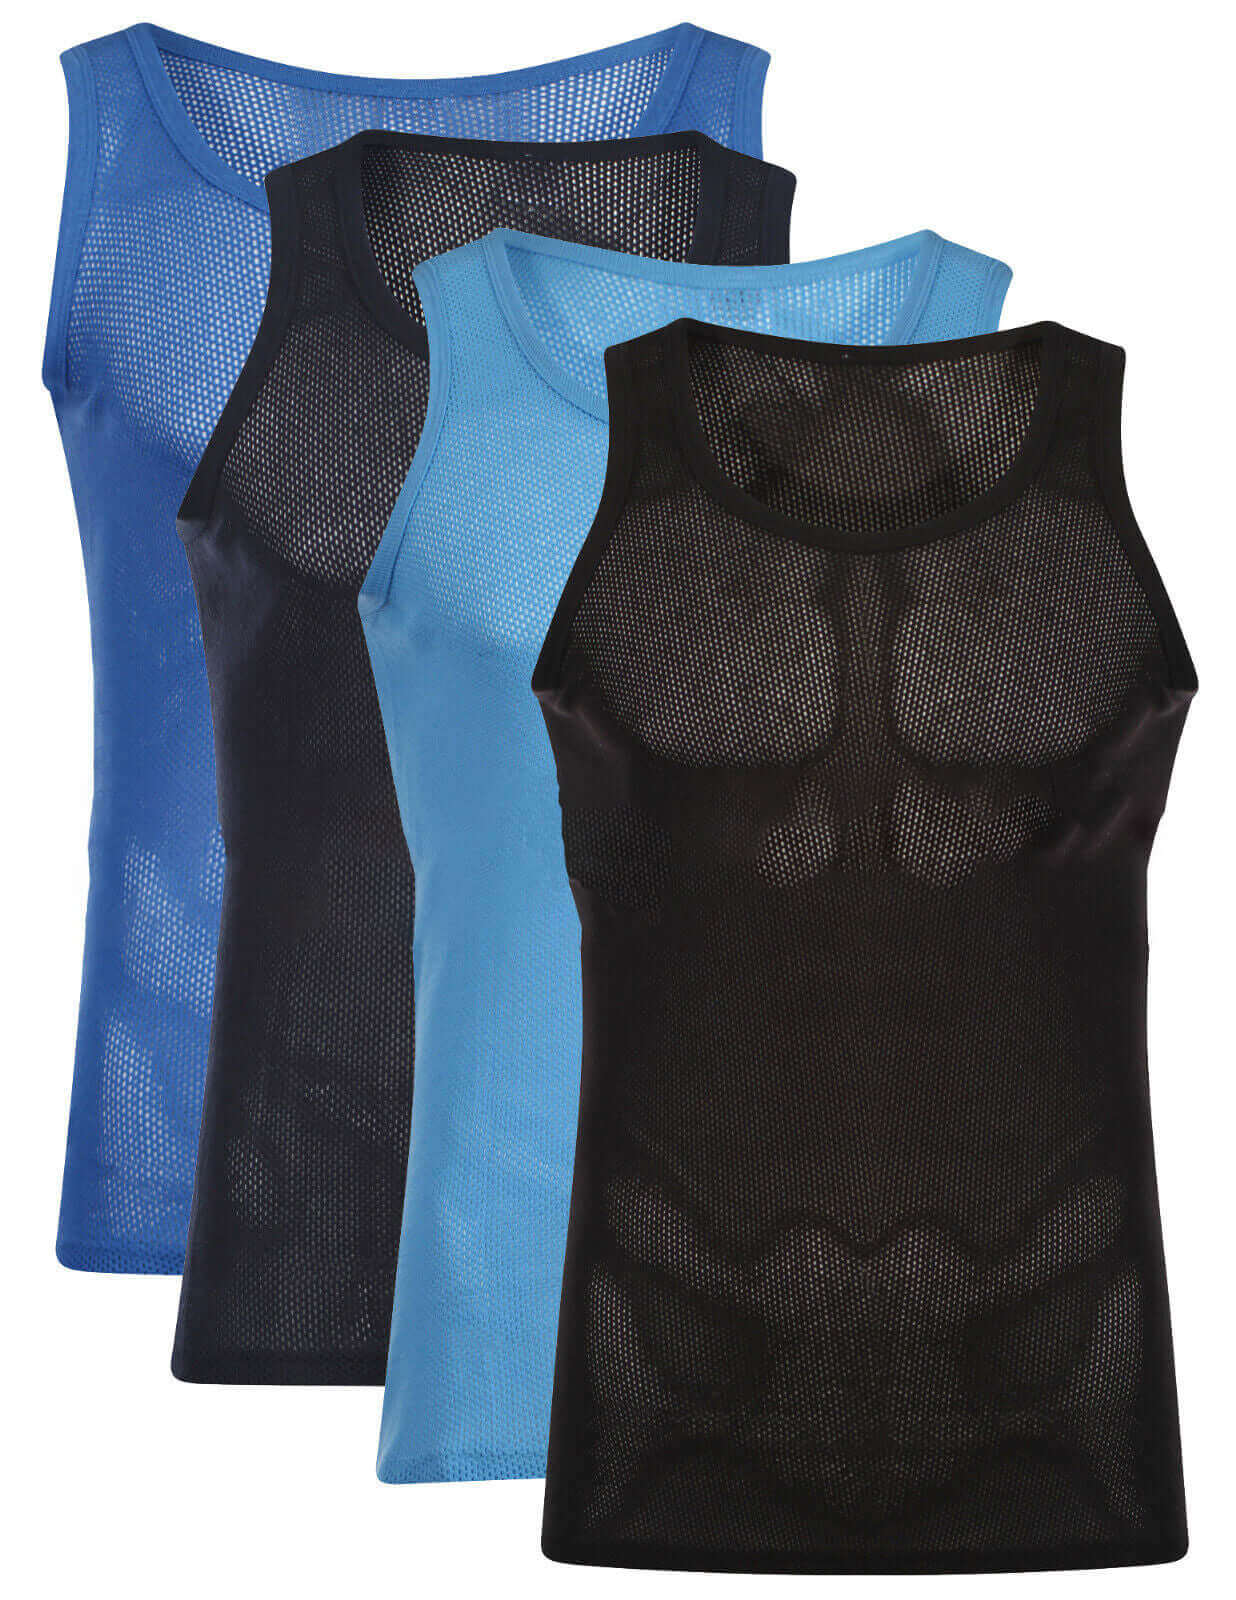 Pack of 3 Men's Mesh String Vest 100% Cotton Muscle Gym Summer. Buy now for £6.00. A Vests by Sock Stack. assorted, athletics, black, blue, boys, breathable, clothing, comfortable, cotton, gym, home, medium, mens, mesh, Out of stock, outdoor, small, sport